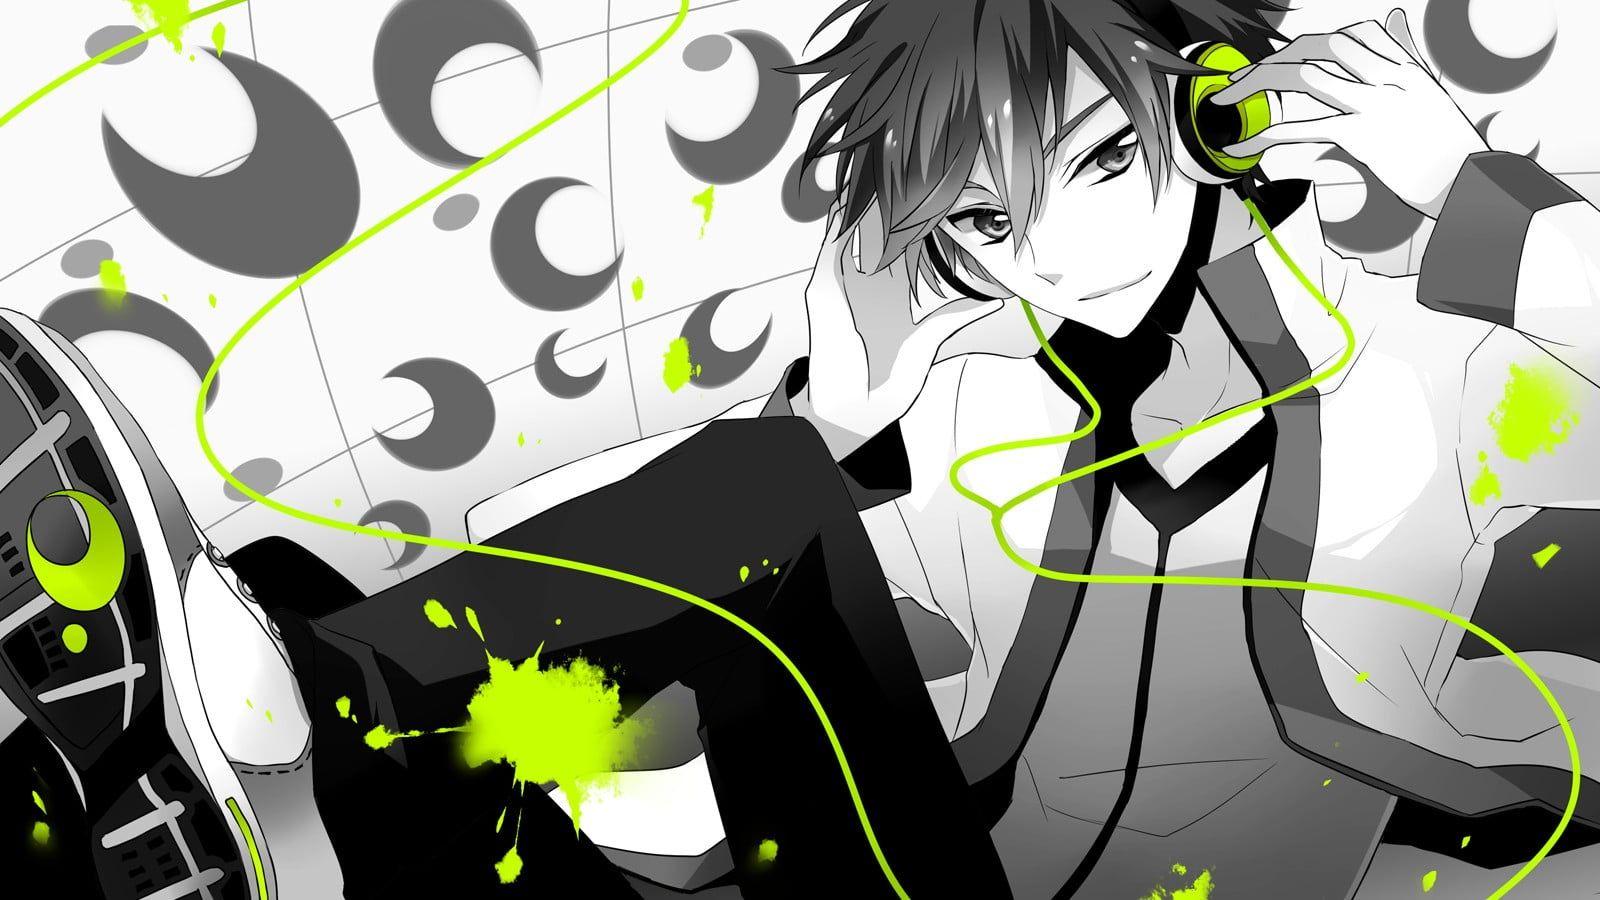 boy with green corded headphone anime character illustration